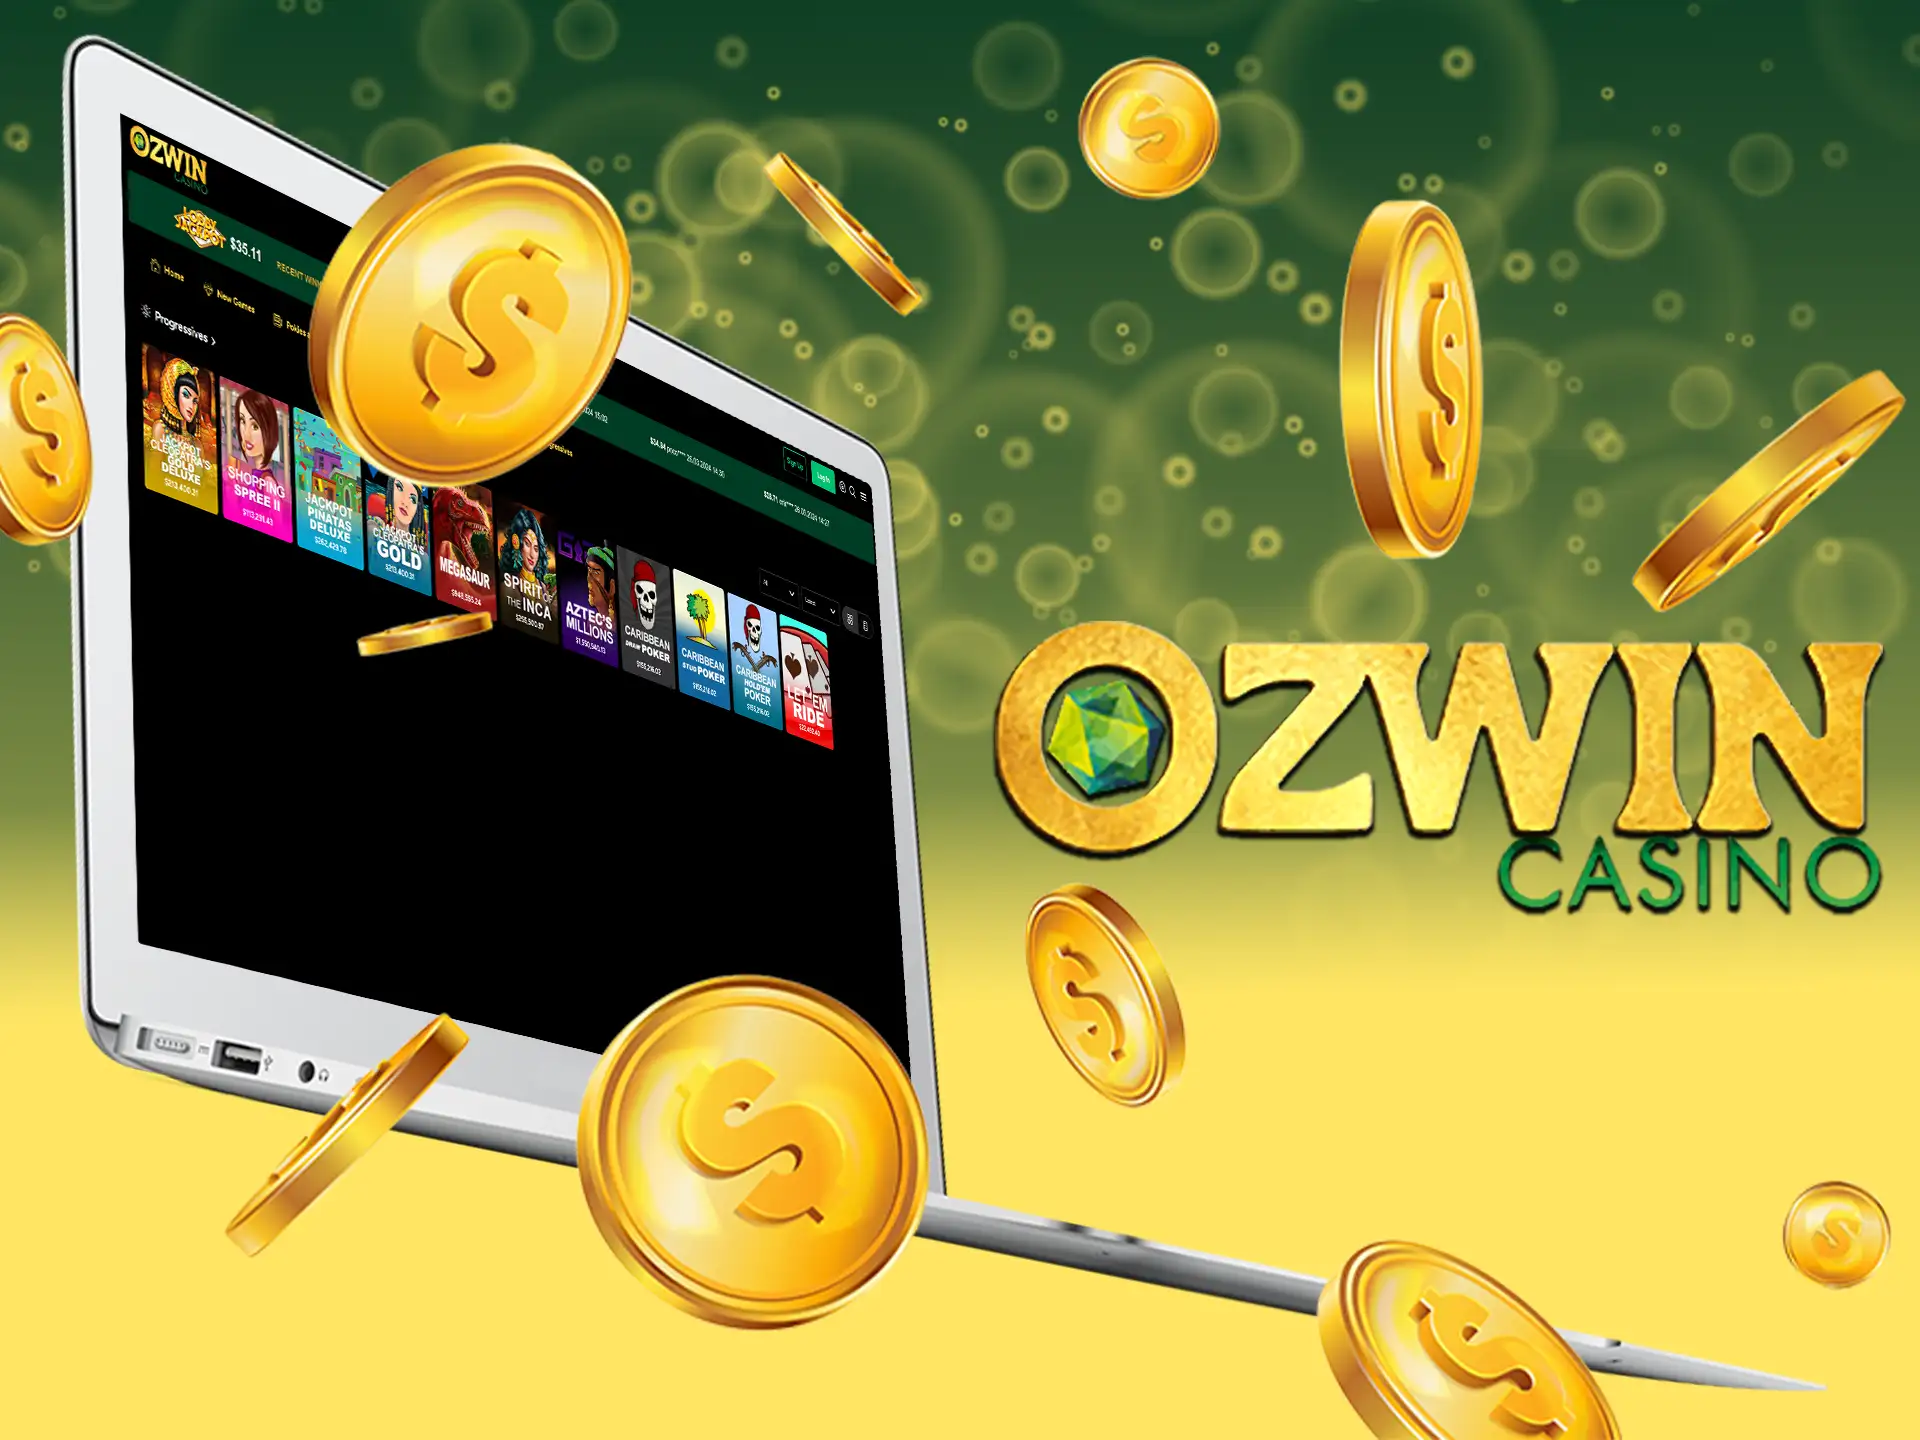 Ozwin offers jackpot games with high payouts.